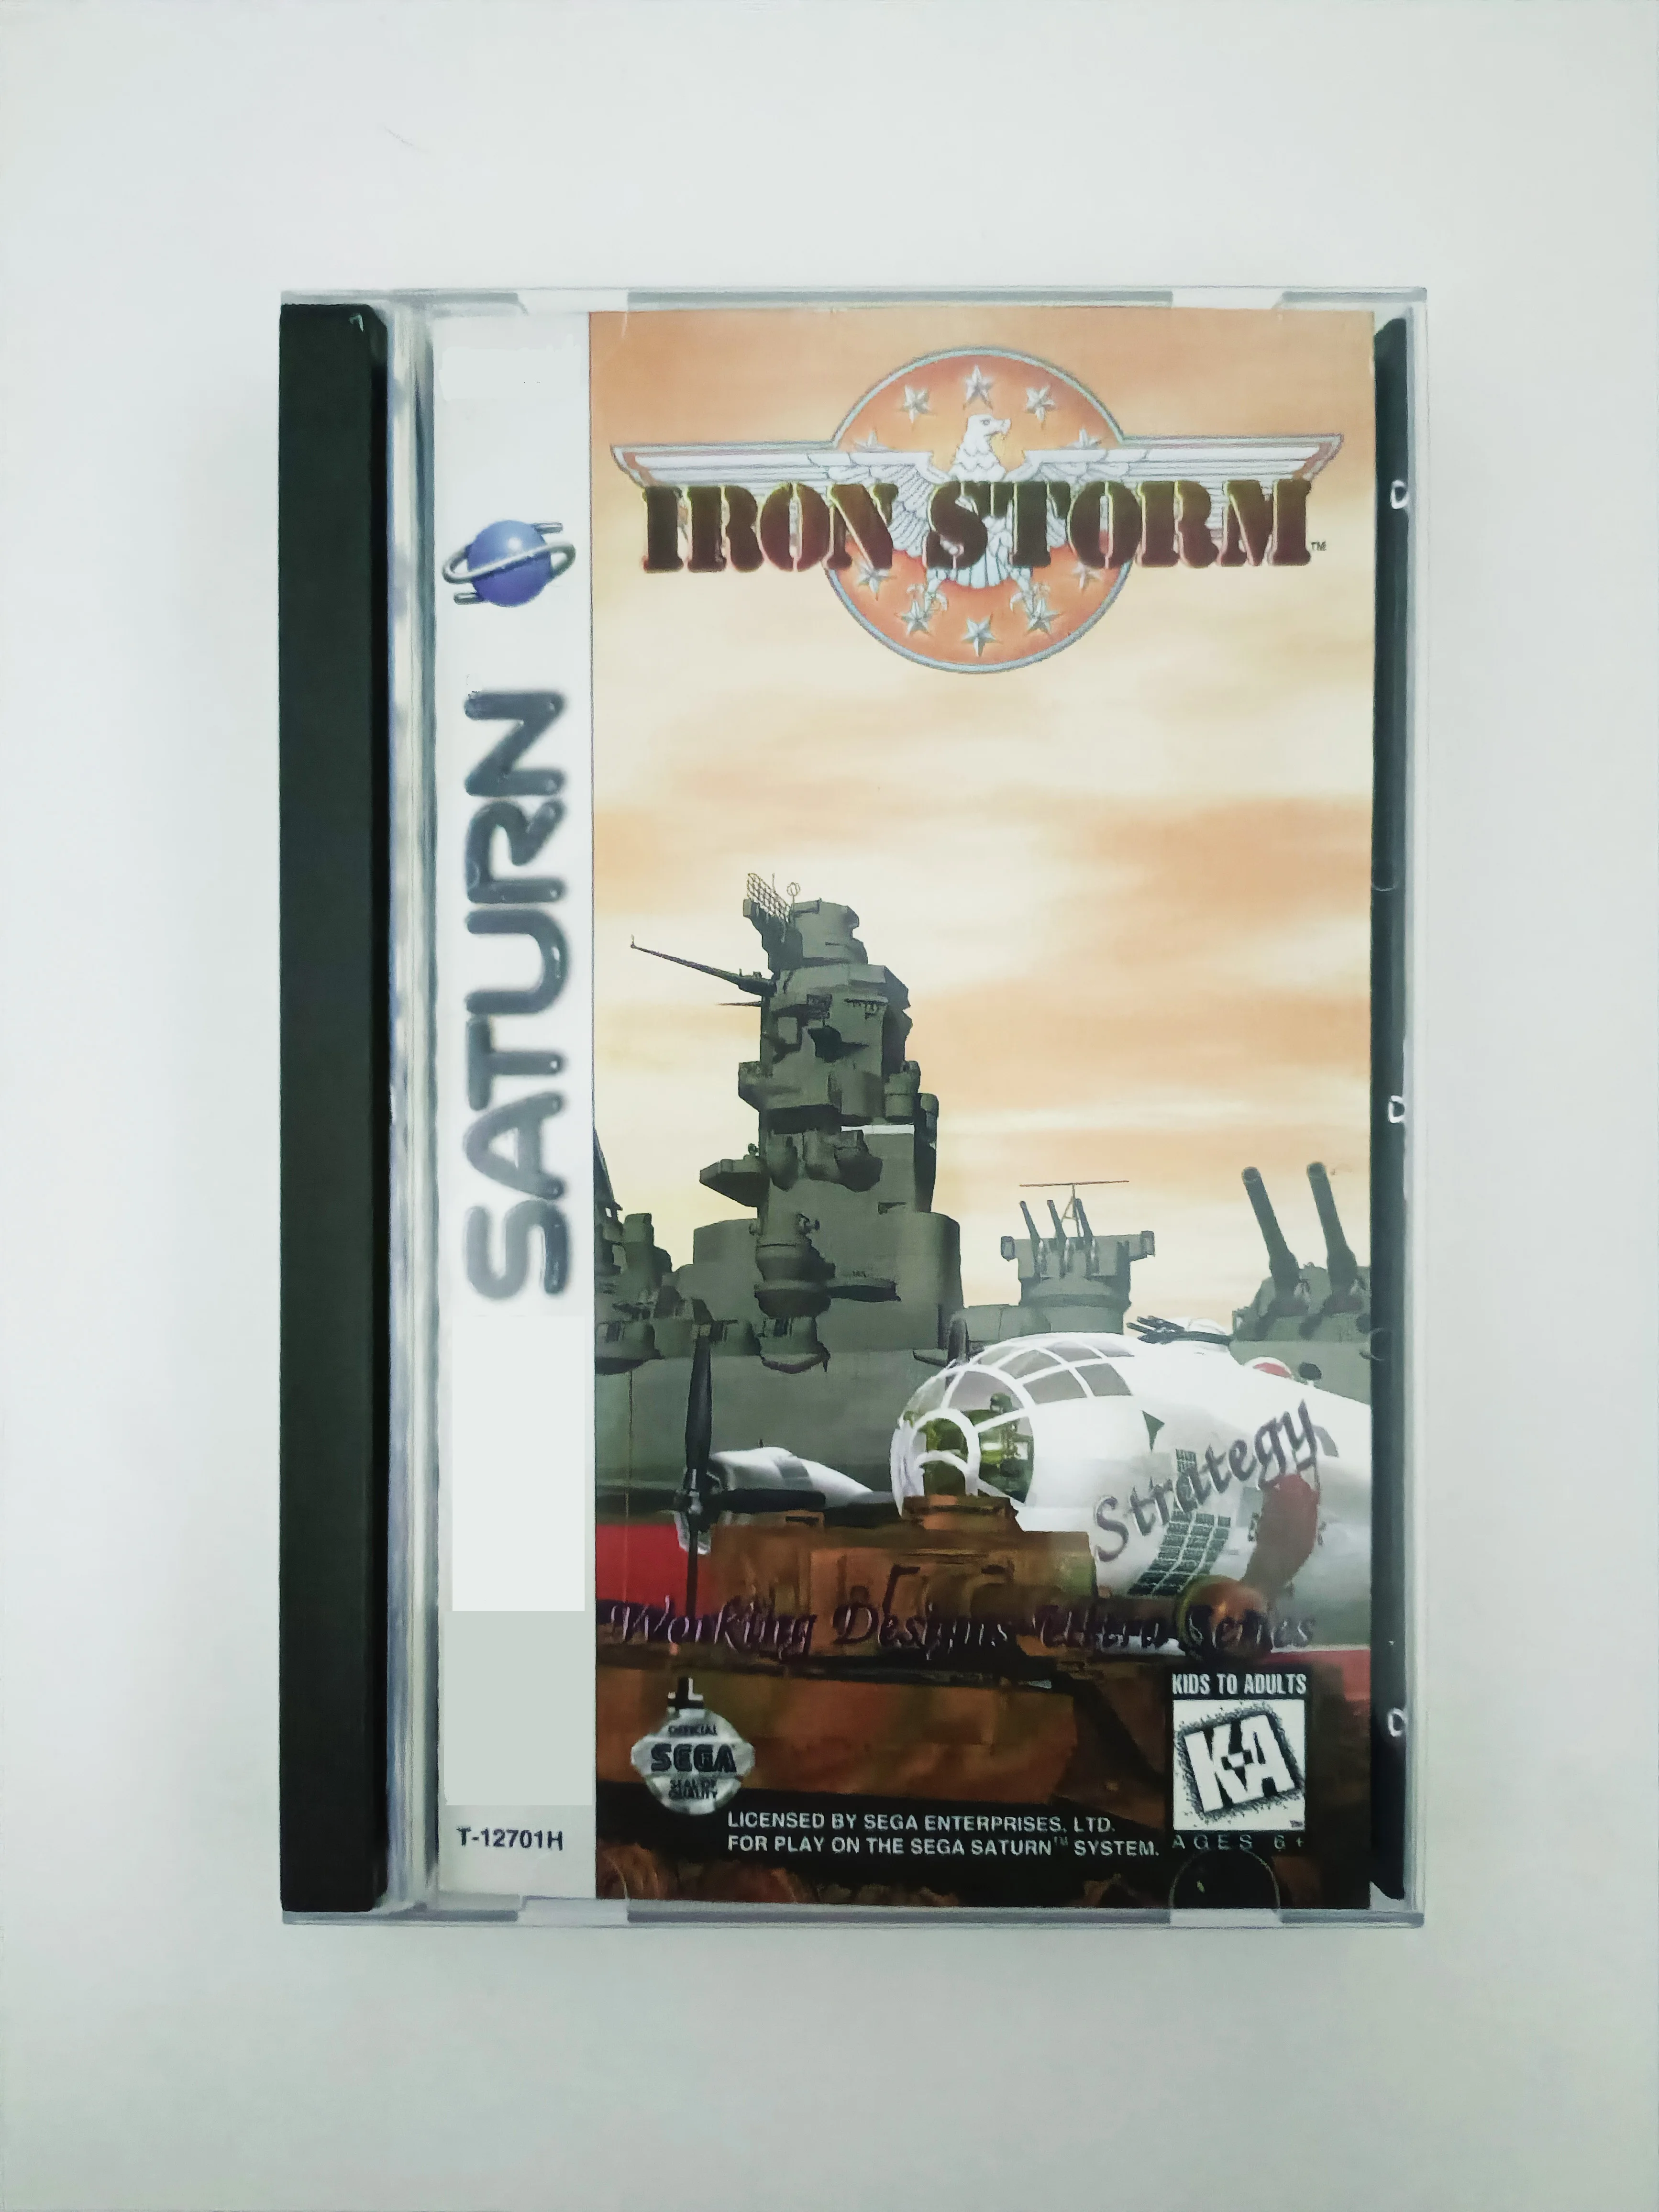 

Saturn Copy Disc Game Iron Storm With Manual Unlock SS Console Game Optical Drive Retro Video Direct Reading Game